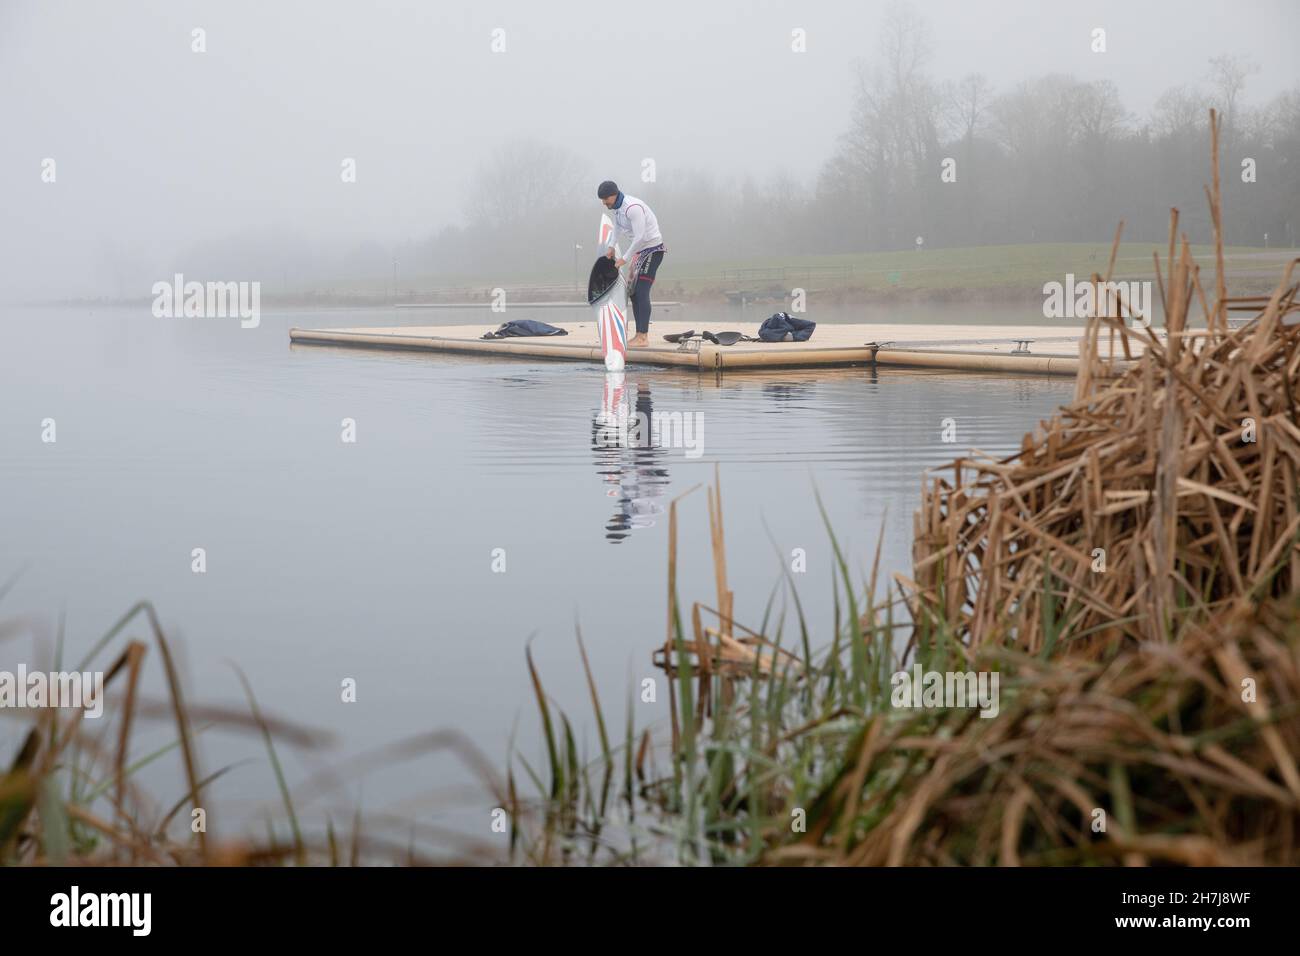 British sprint canoeist Liam Heath MBE heading out for a morning training session at Dorney Lake on the 4th February 2021 in Buckinghamshire in the Un Stock Photo